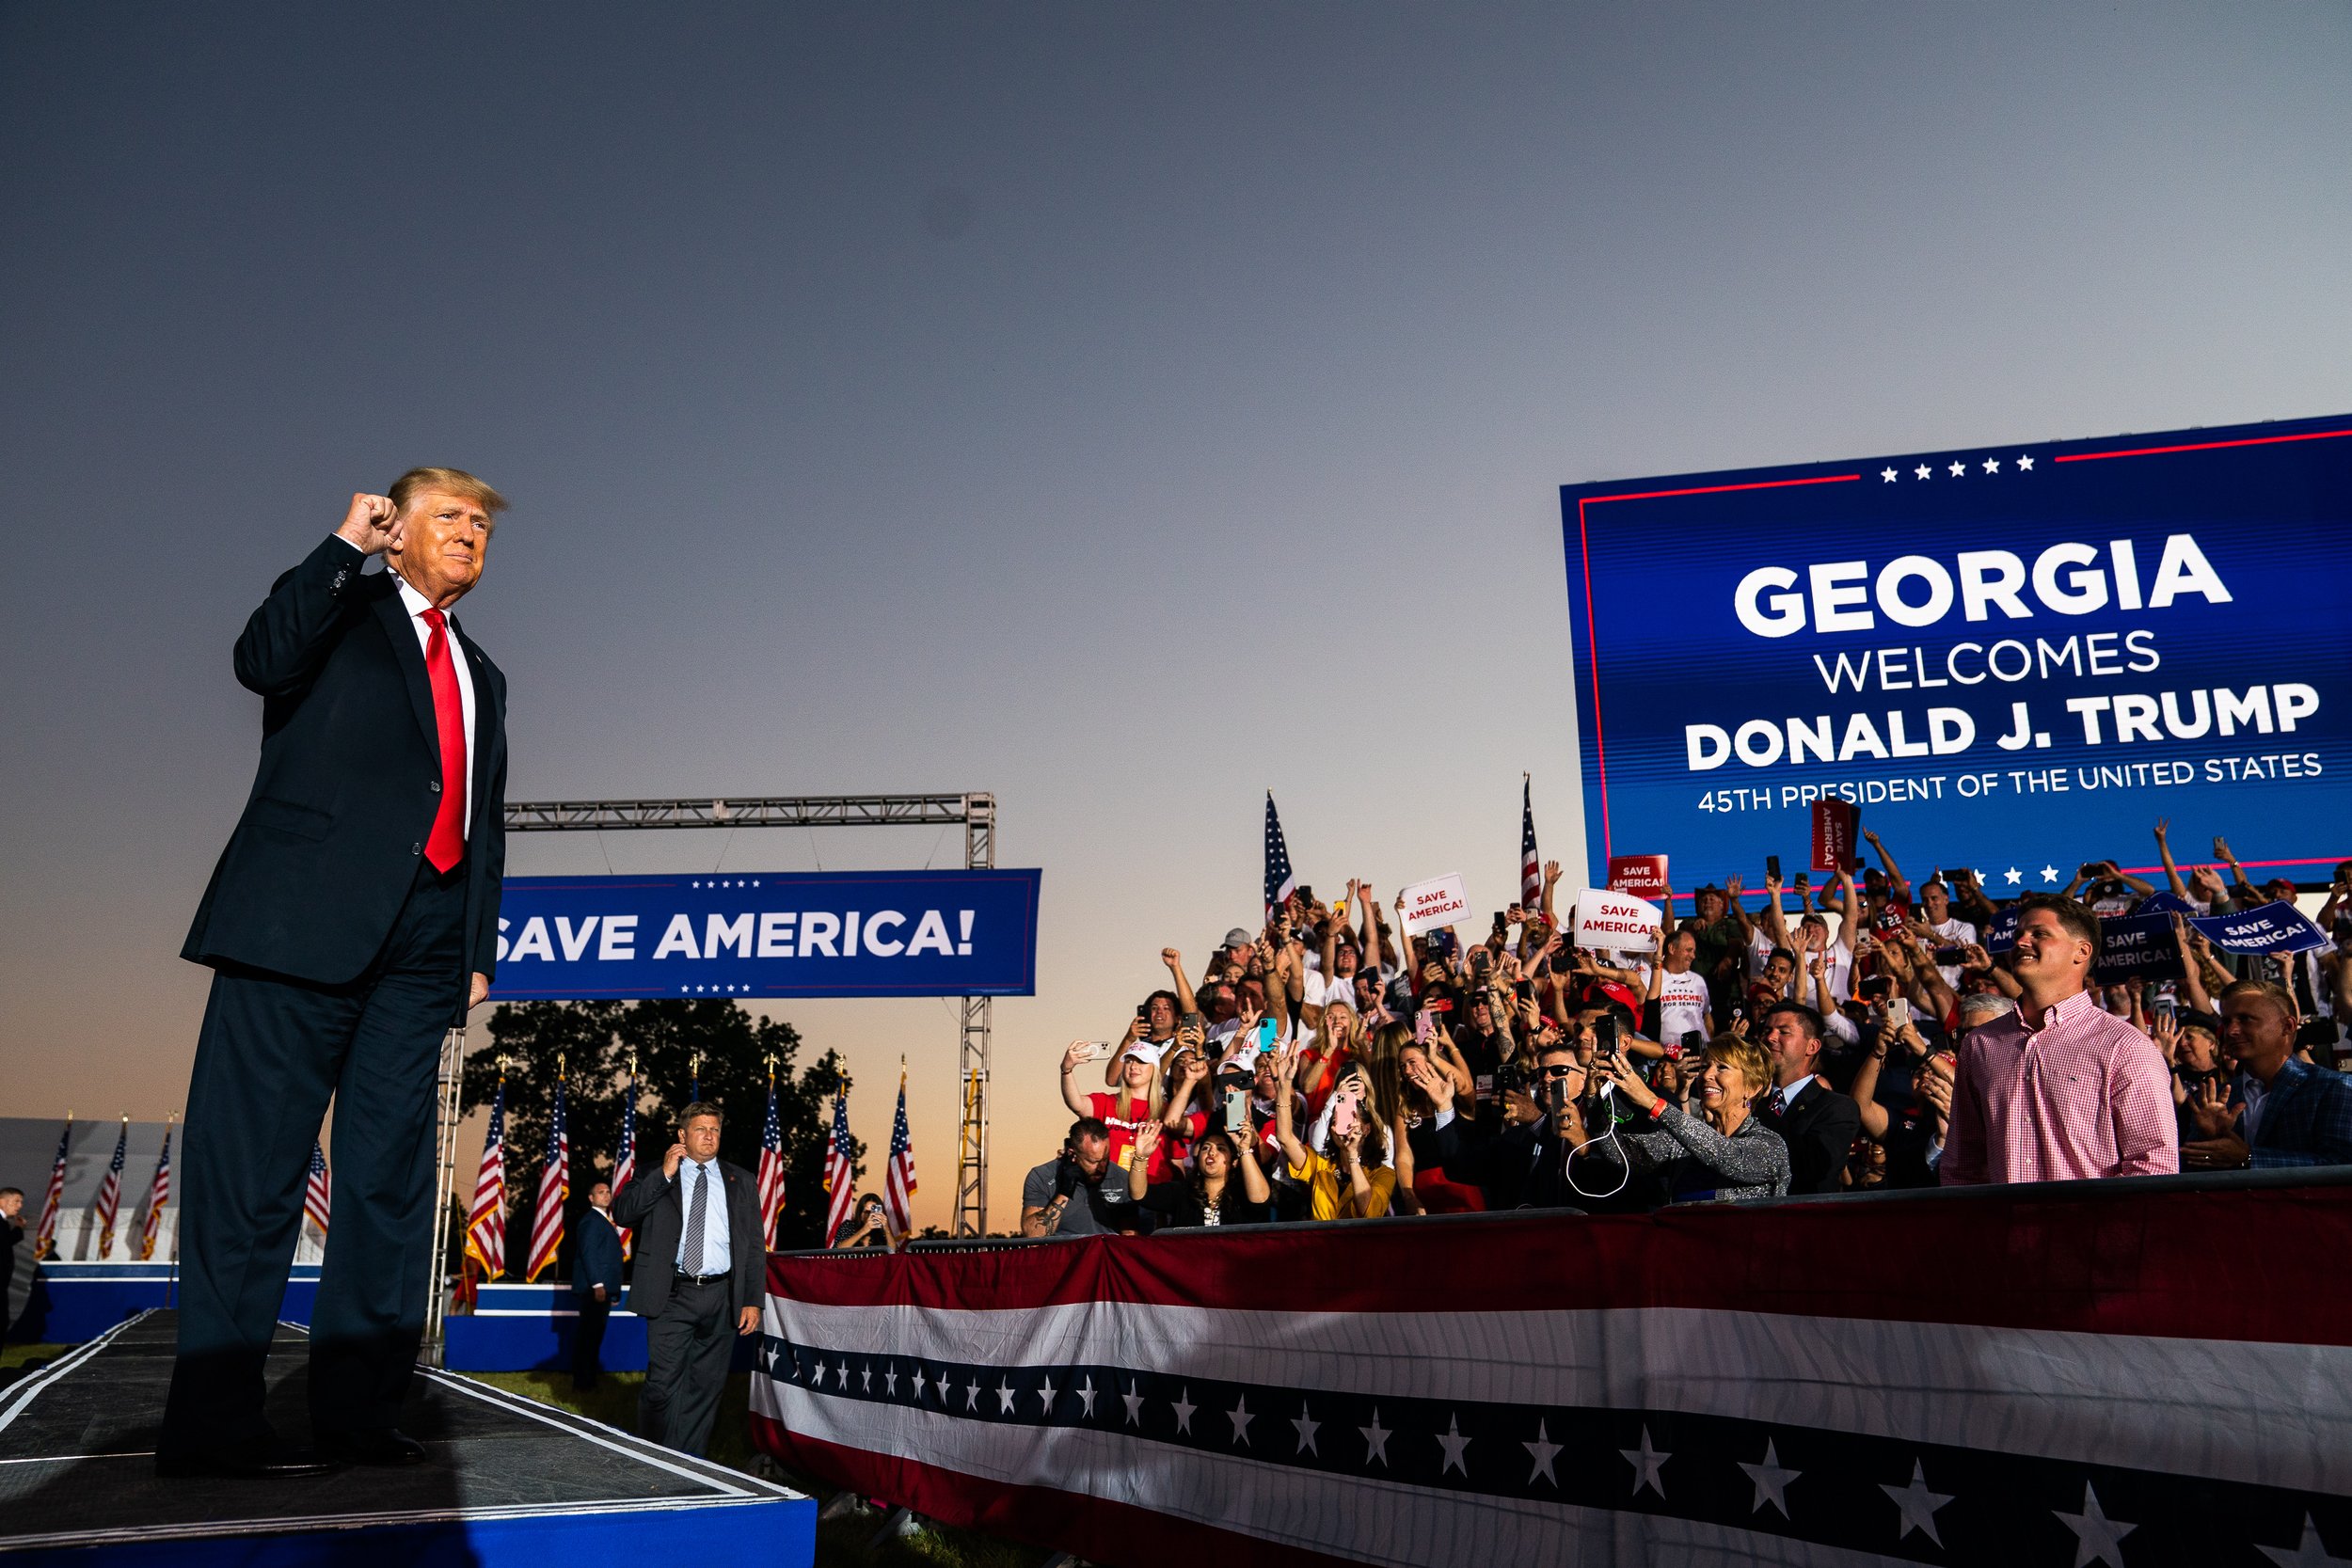  Former US President Donald J. Trump enters to deliver remarks at his “Save America” rally at the Georgia National Fairgrounds in Perry, Georgia. 